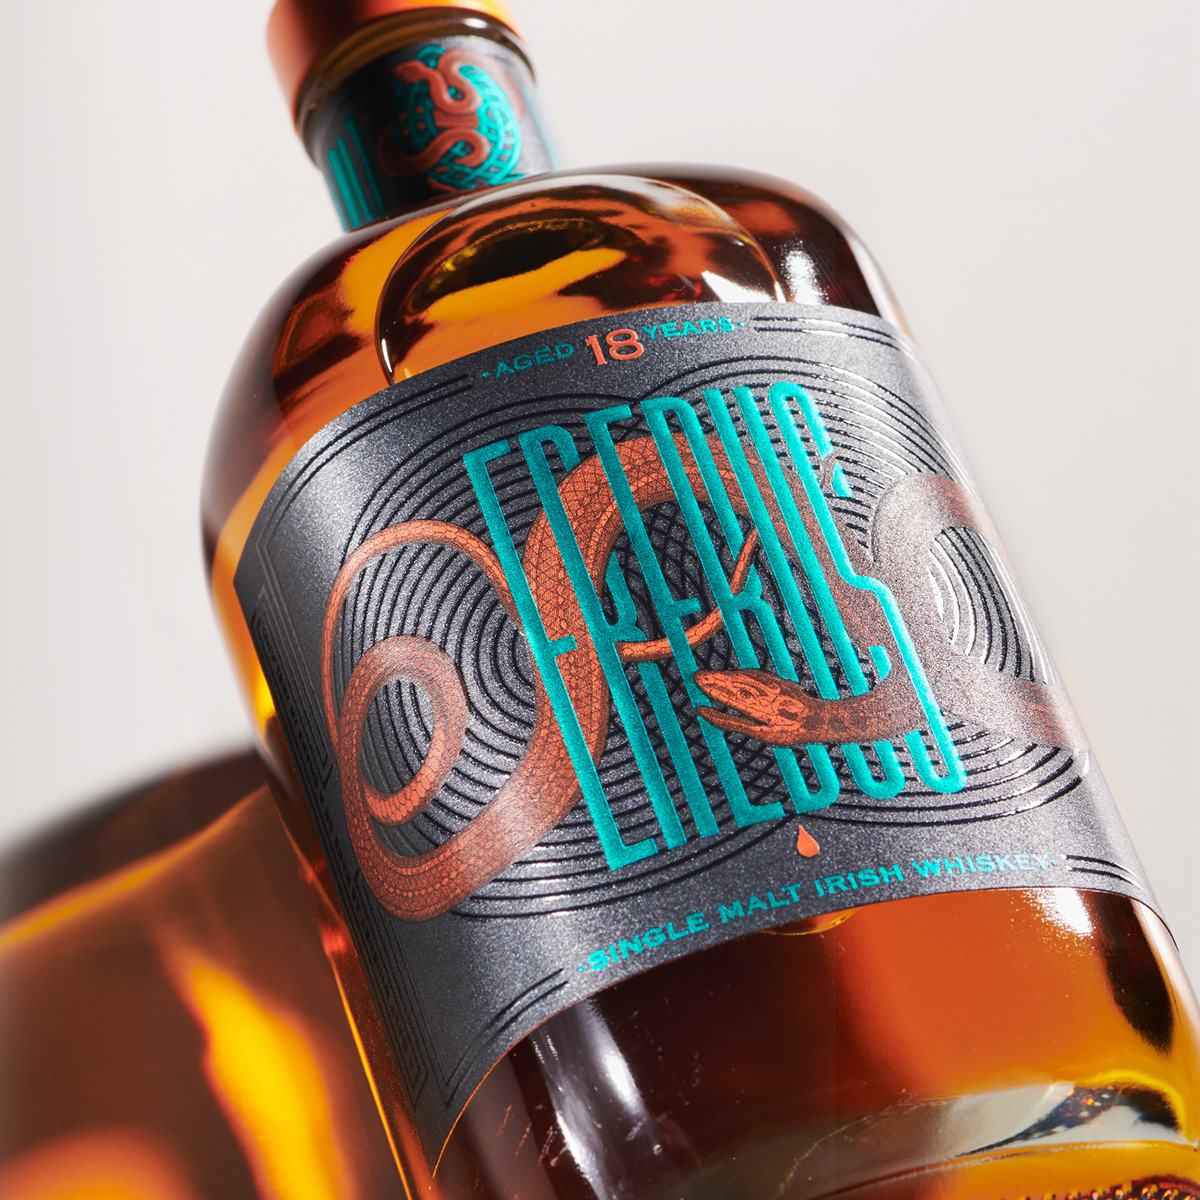 10 Luxurious Spirit Bottle Packaging Designs That'll Knock Your Socks Off